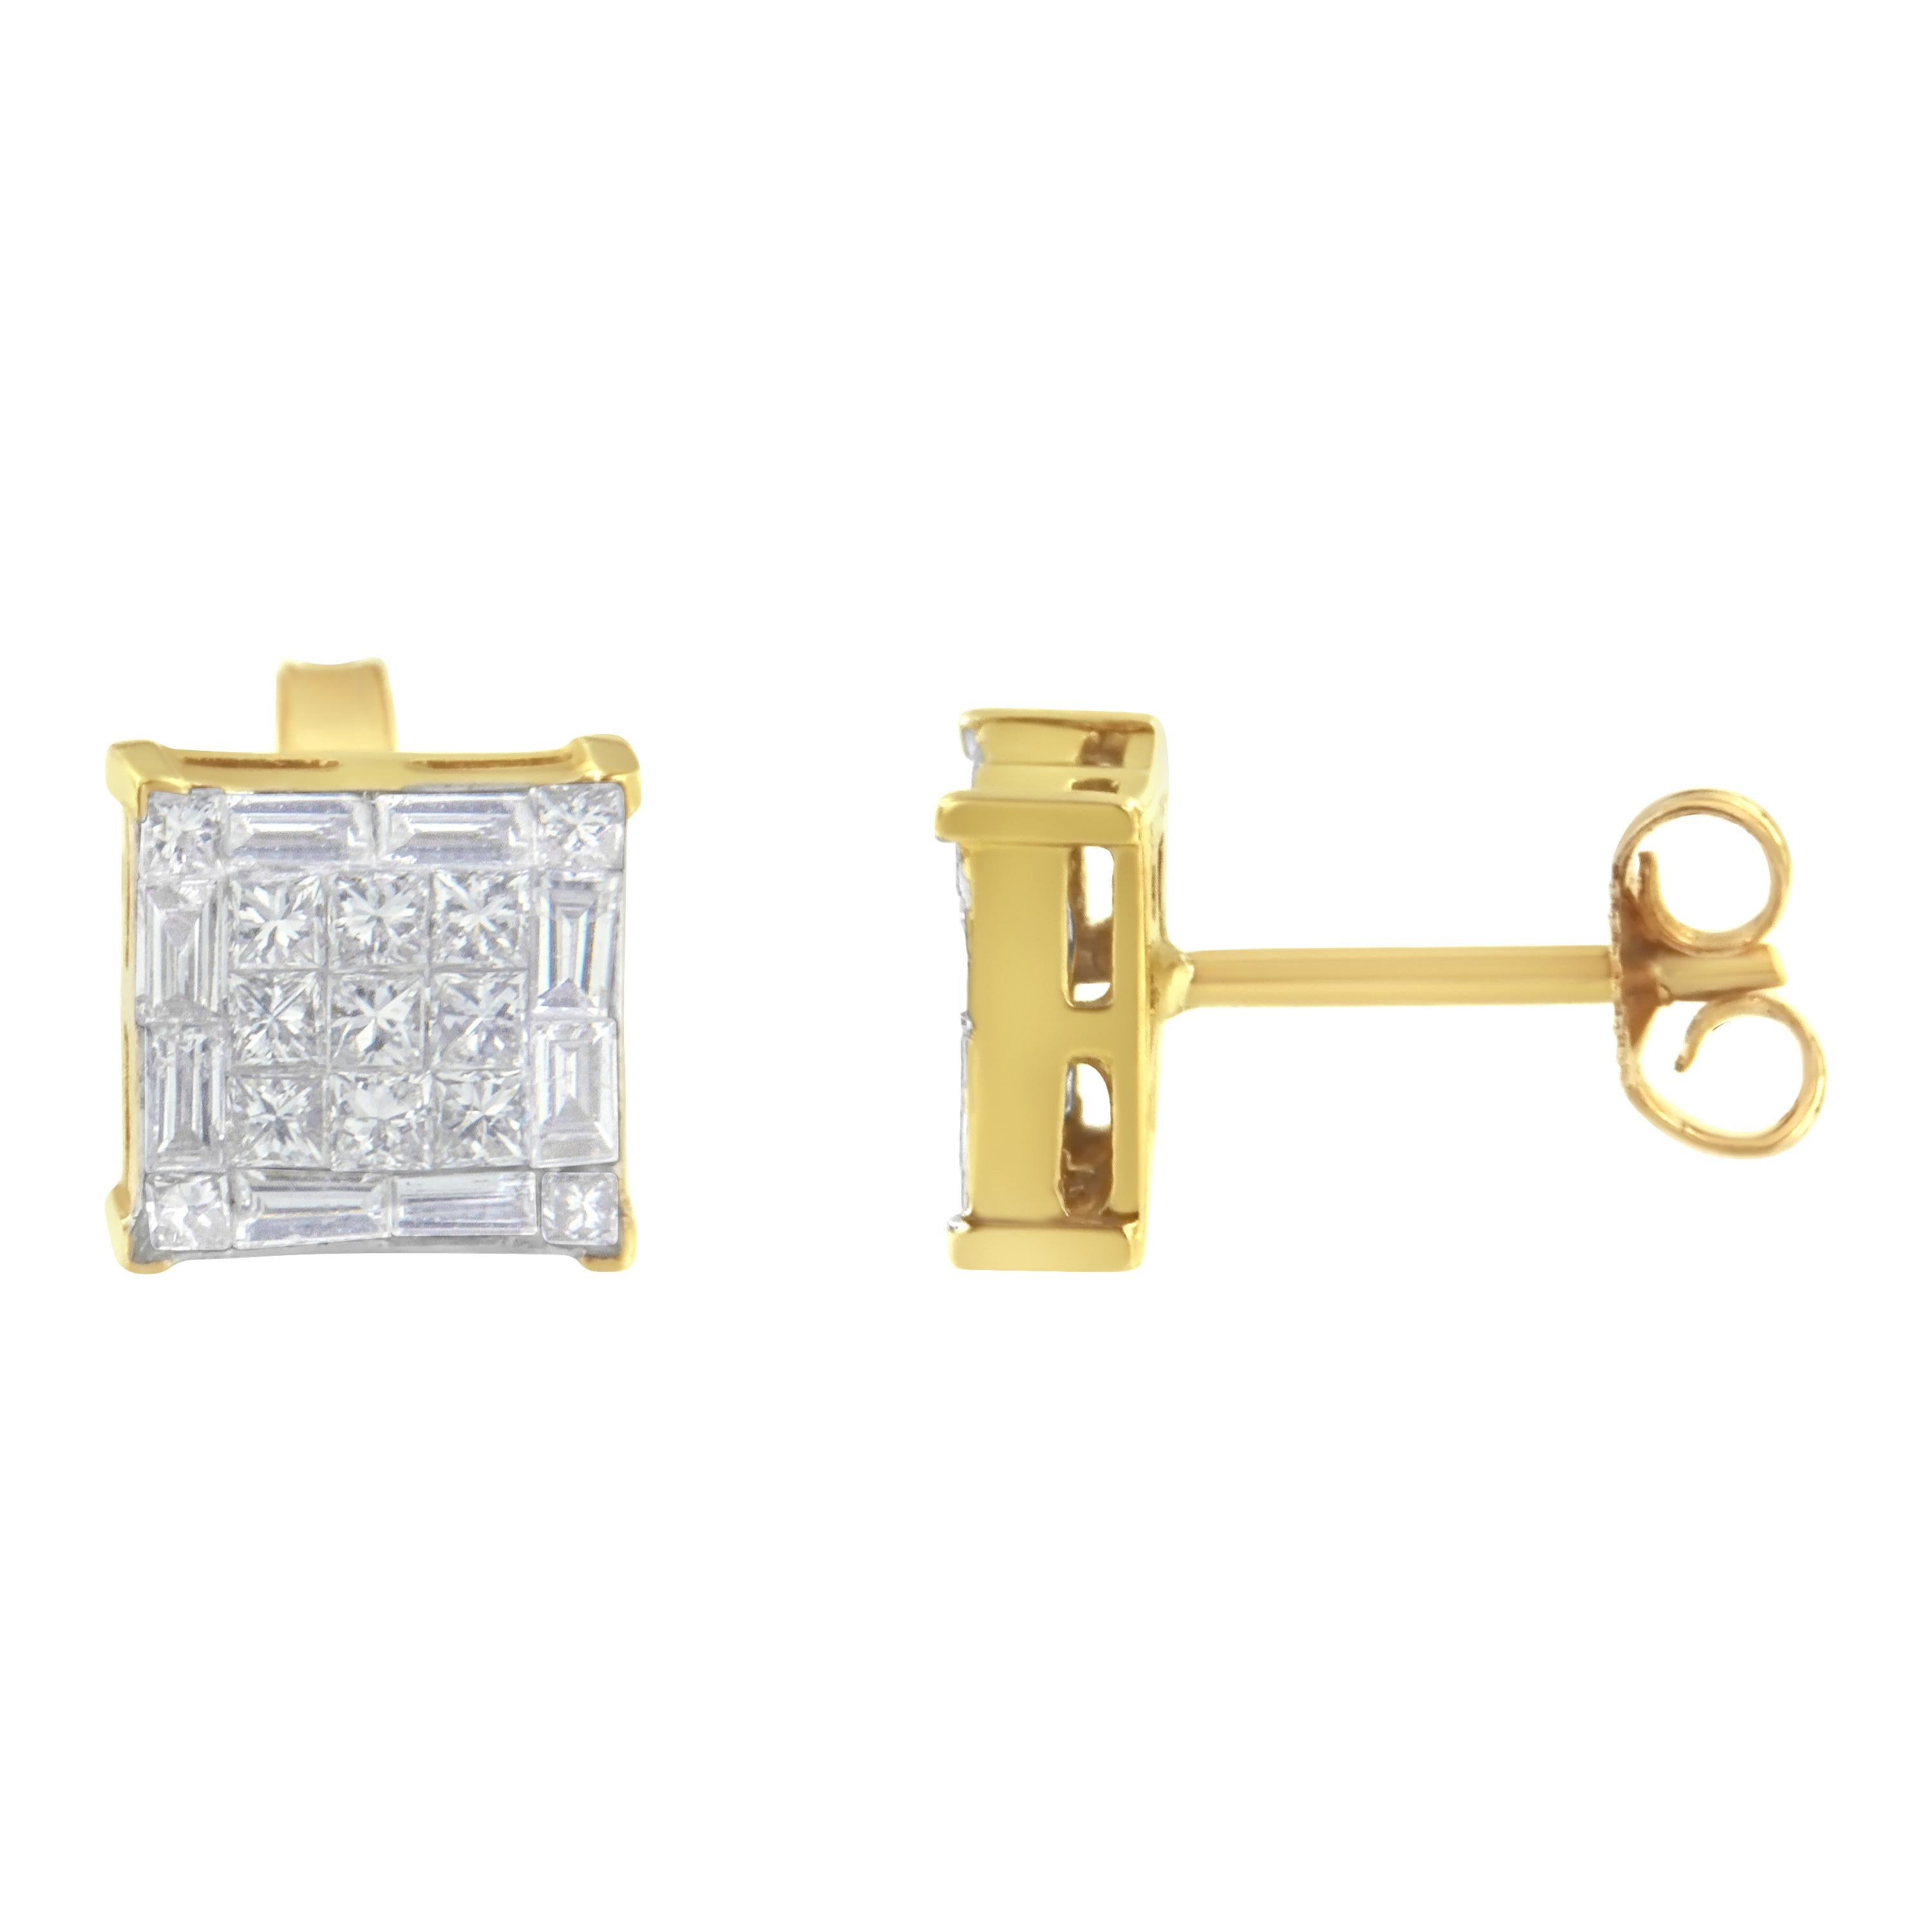 This glamorous pair of stud earrings features cluster of nine princess cut diamonds set in a square shape within a halo of round a baguette diamonds. Crafted in 10 karat yellow gold, they have a total diamond weight of 1/2 carat. These natural